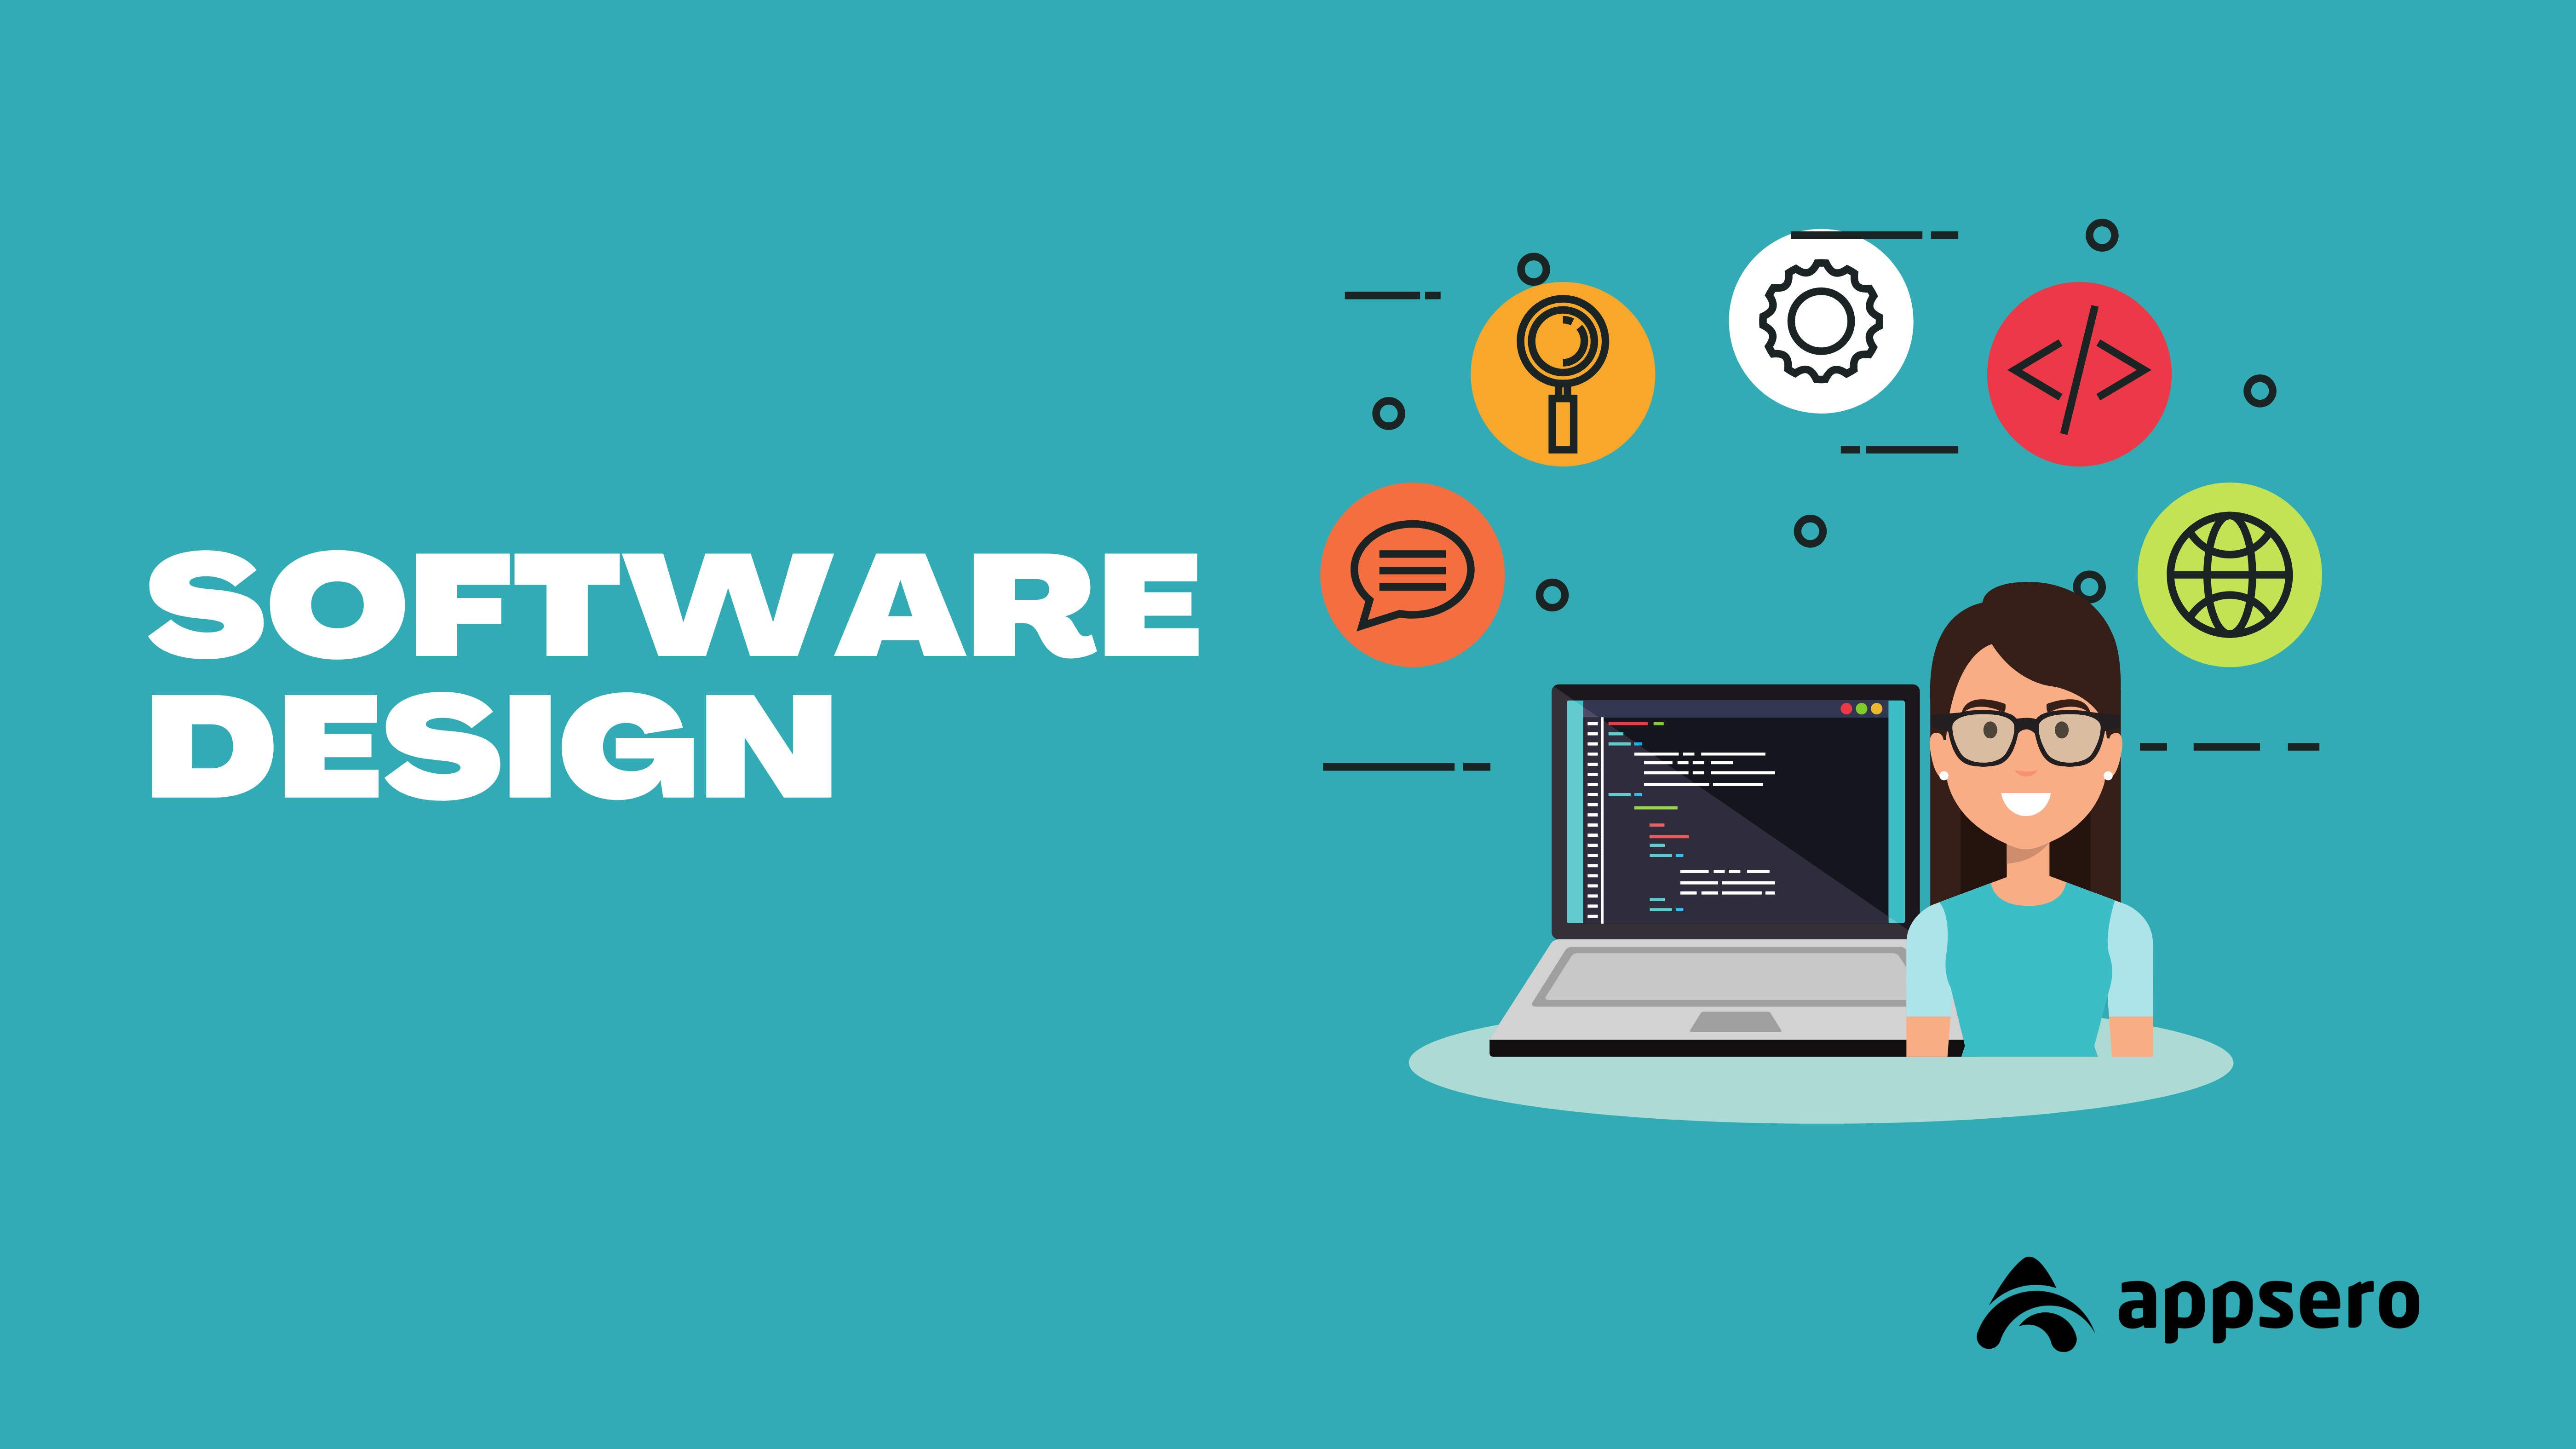 what is software design